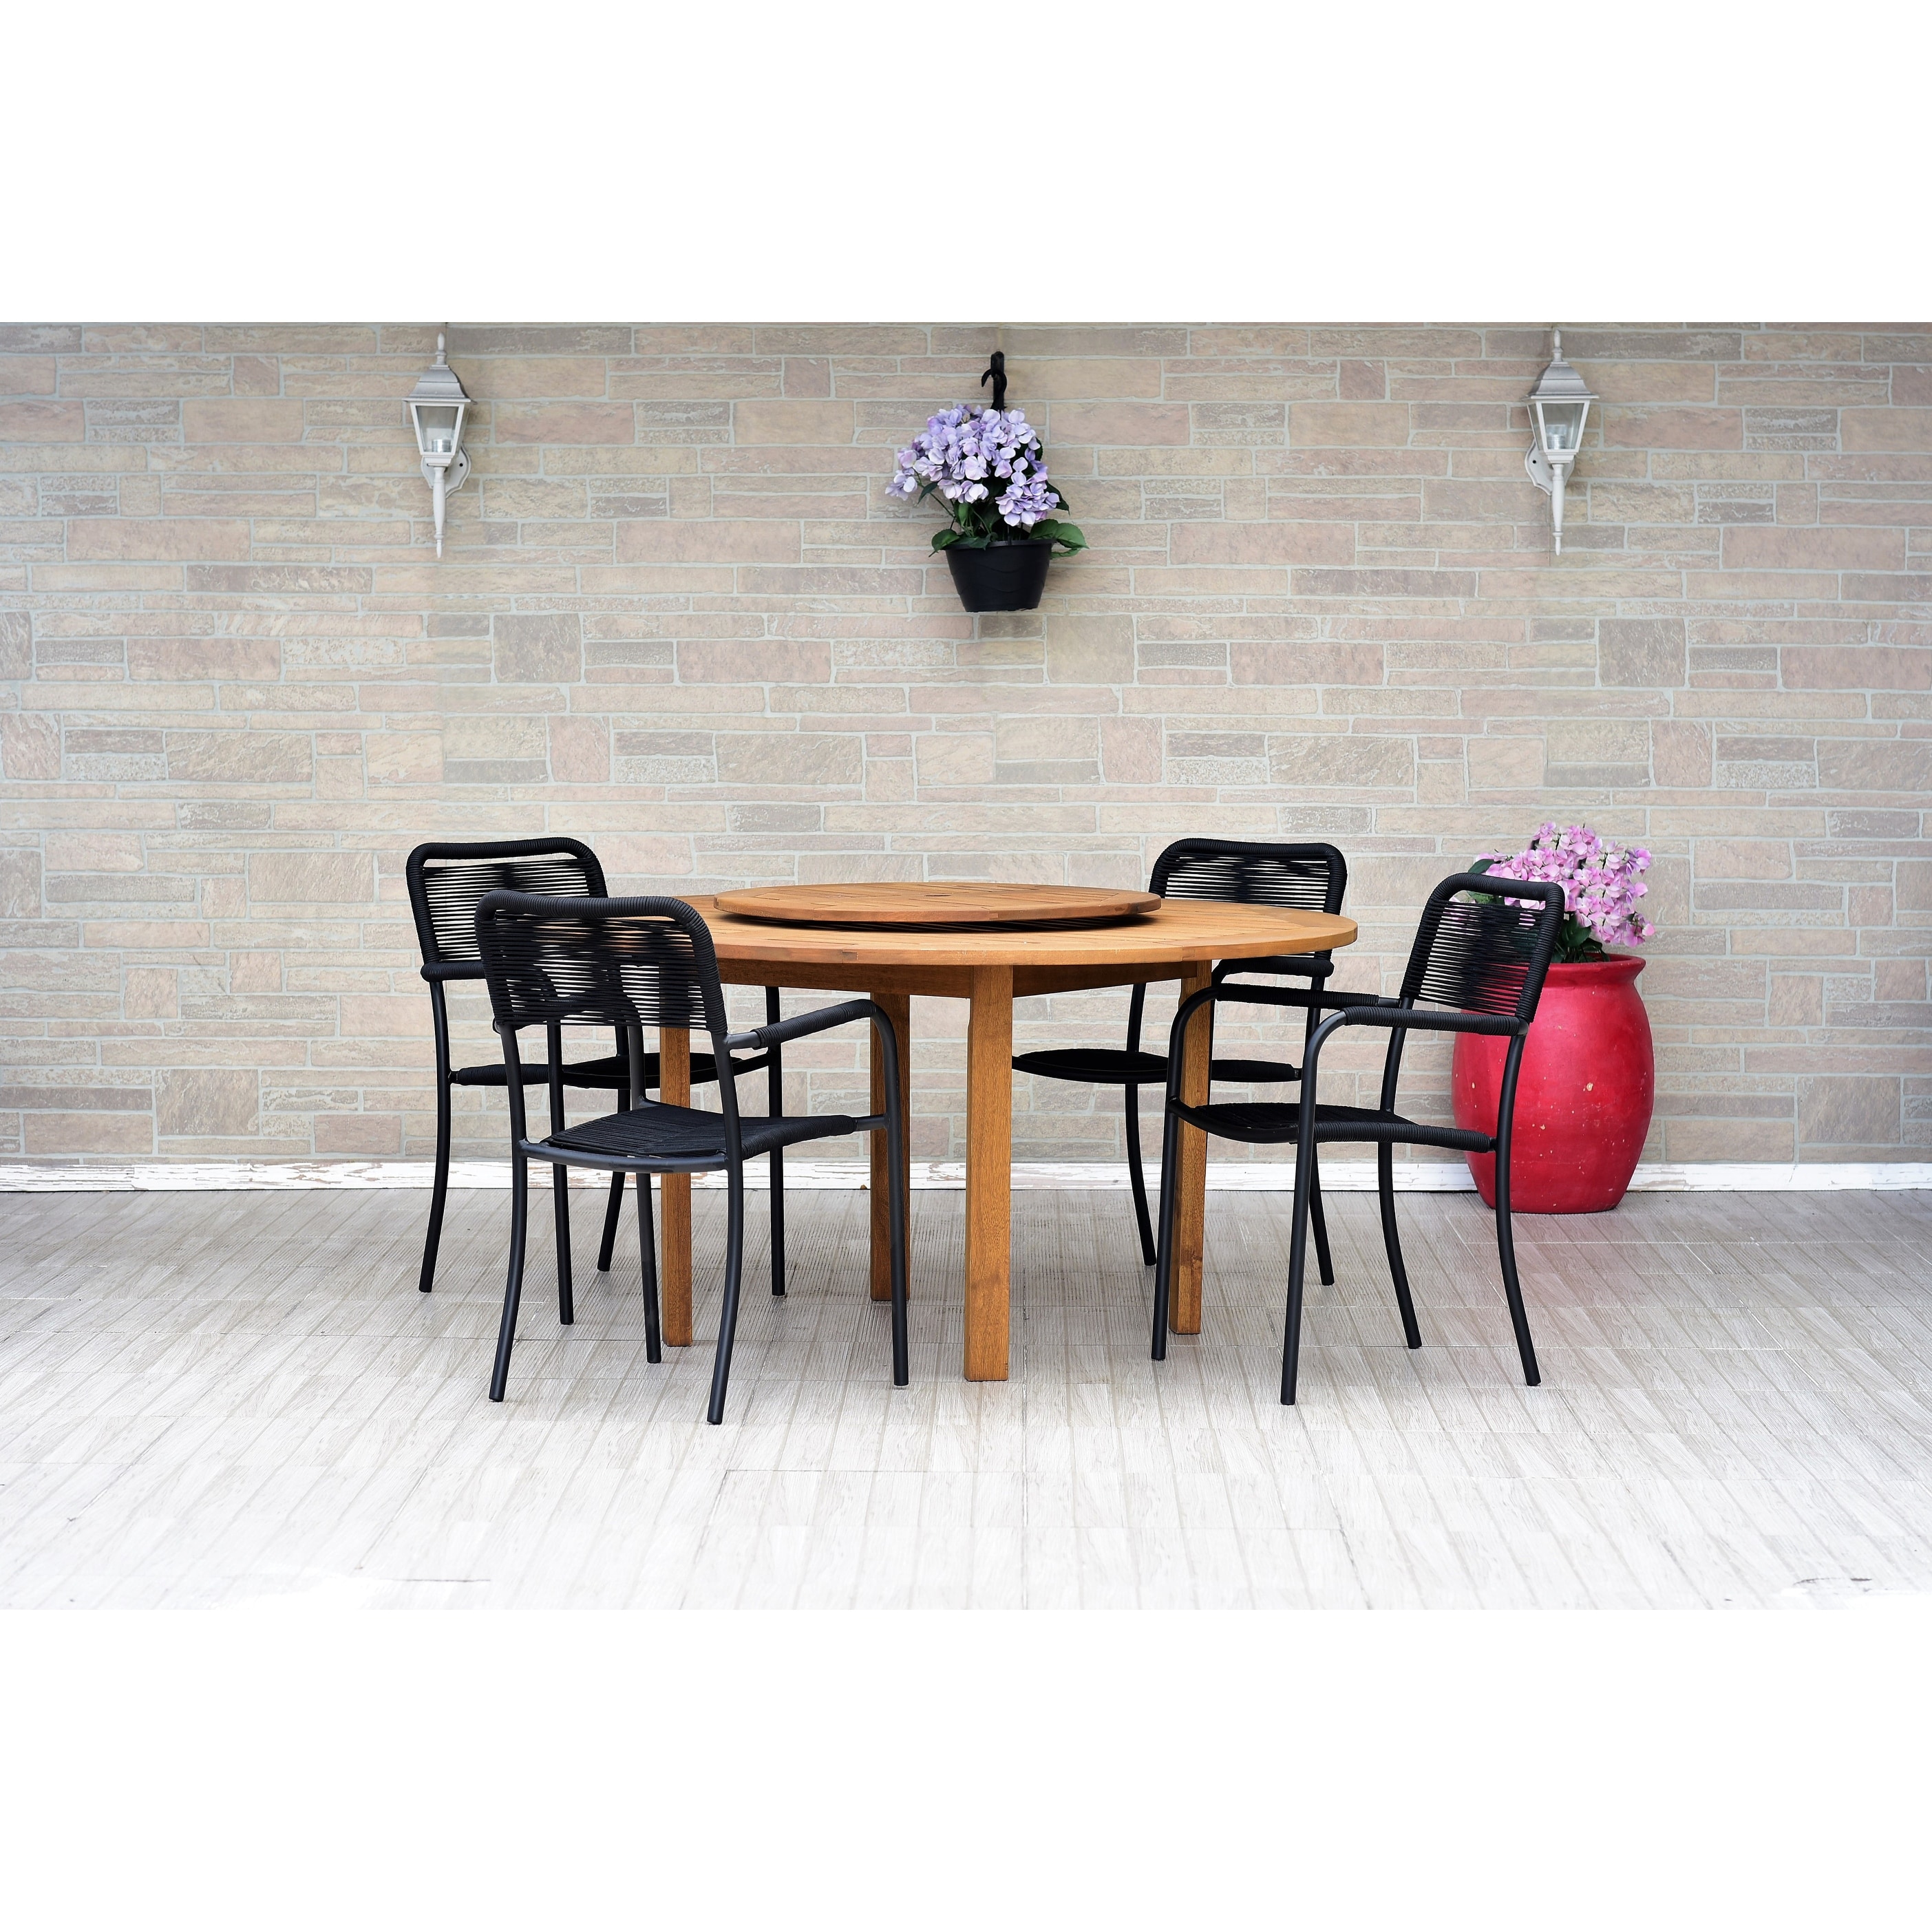 5-piece Wood Table Dining Set With Lazy Susan